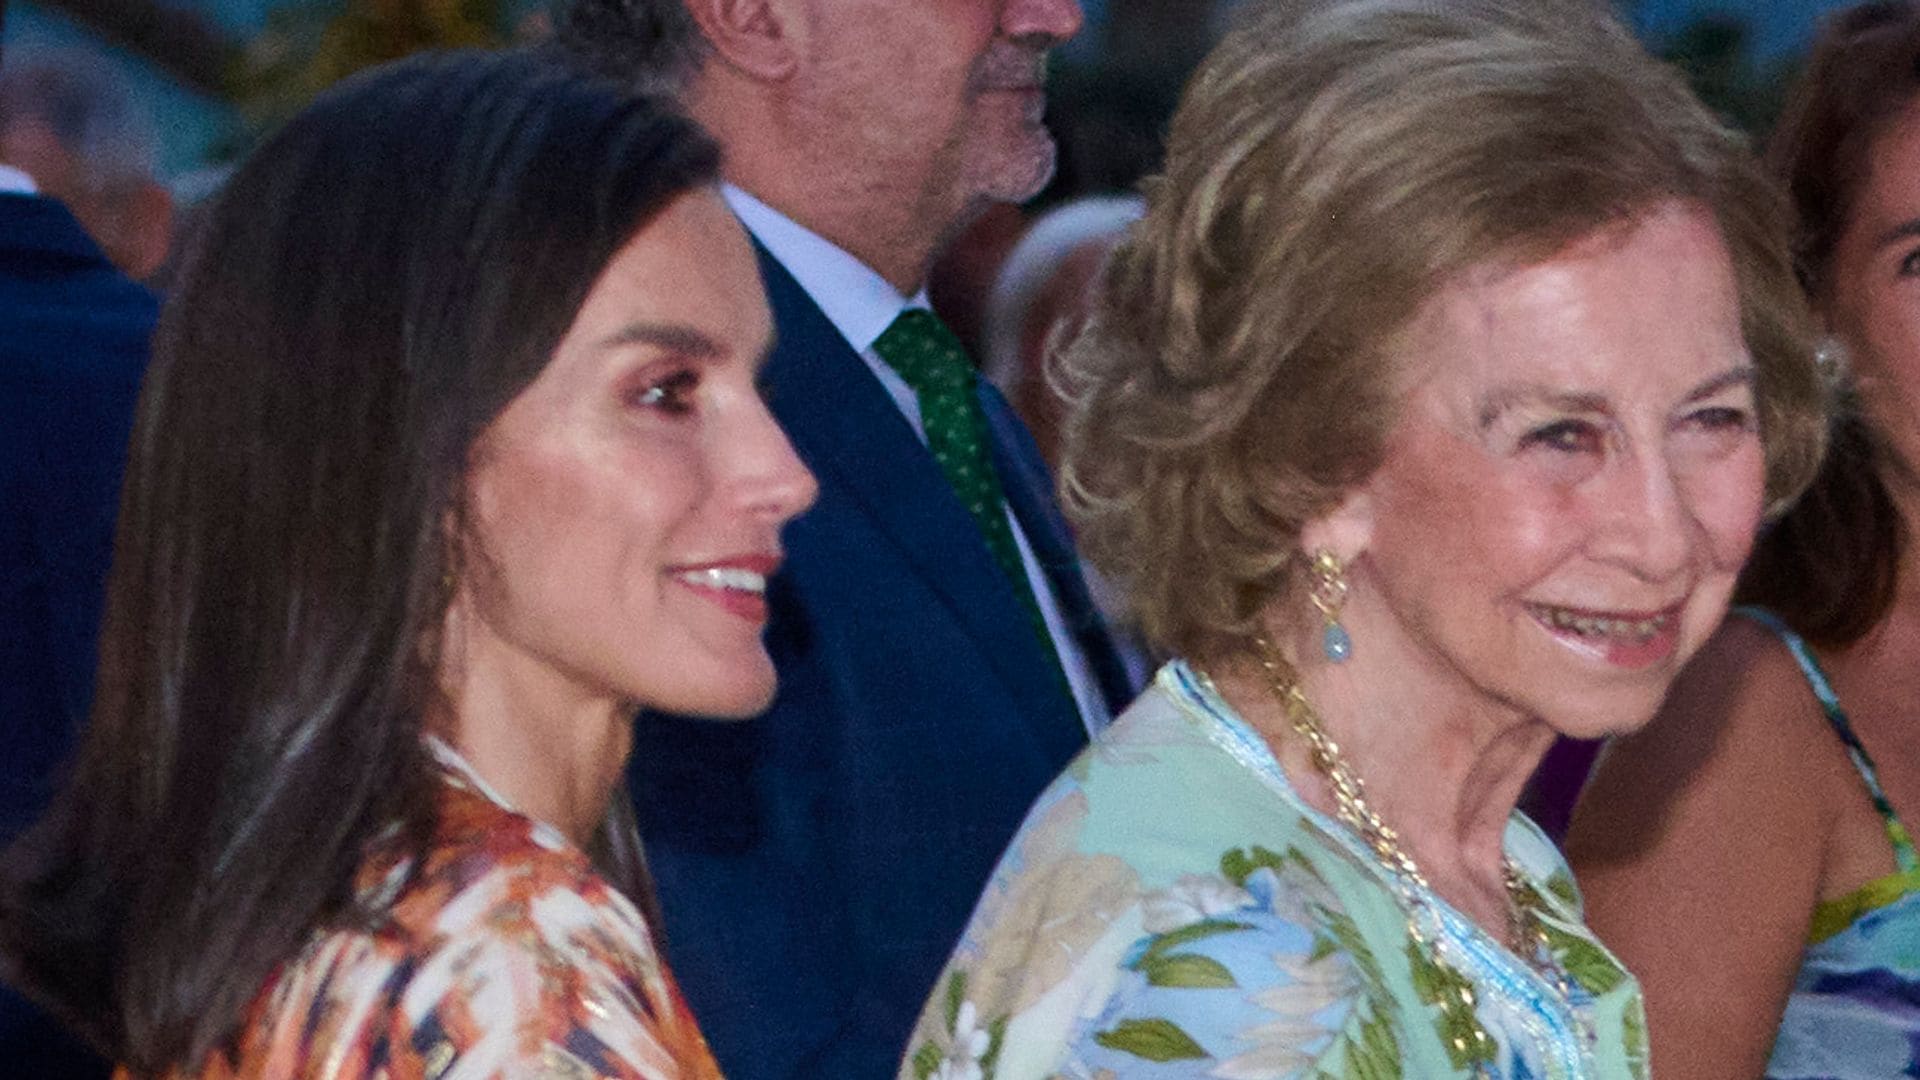 Prints in Palma de Mallorca! Queen Letizia and mother-in-law Queen Sofia step out in colorful looks